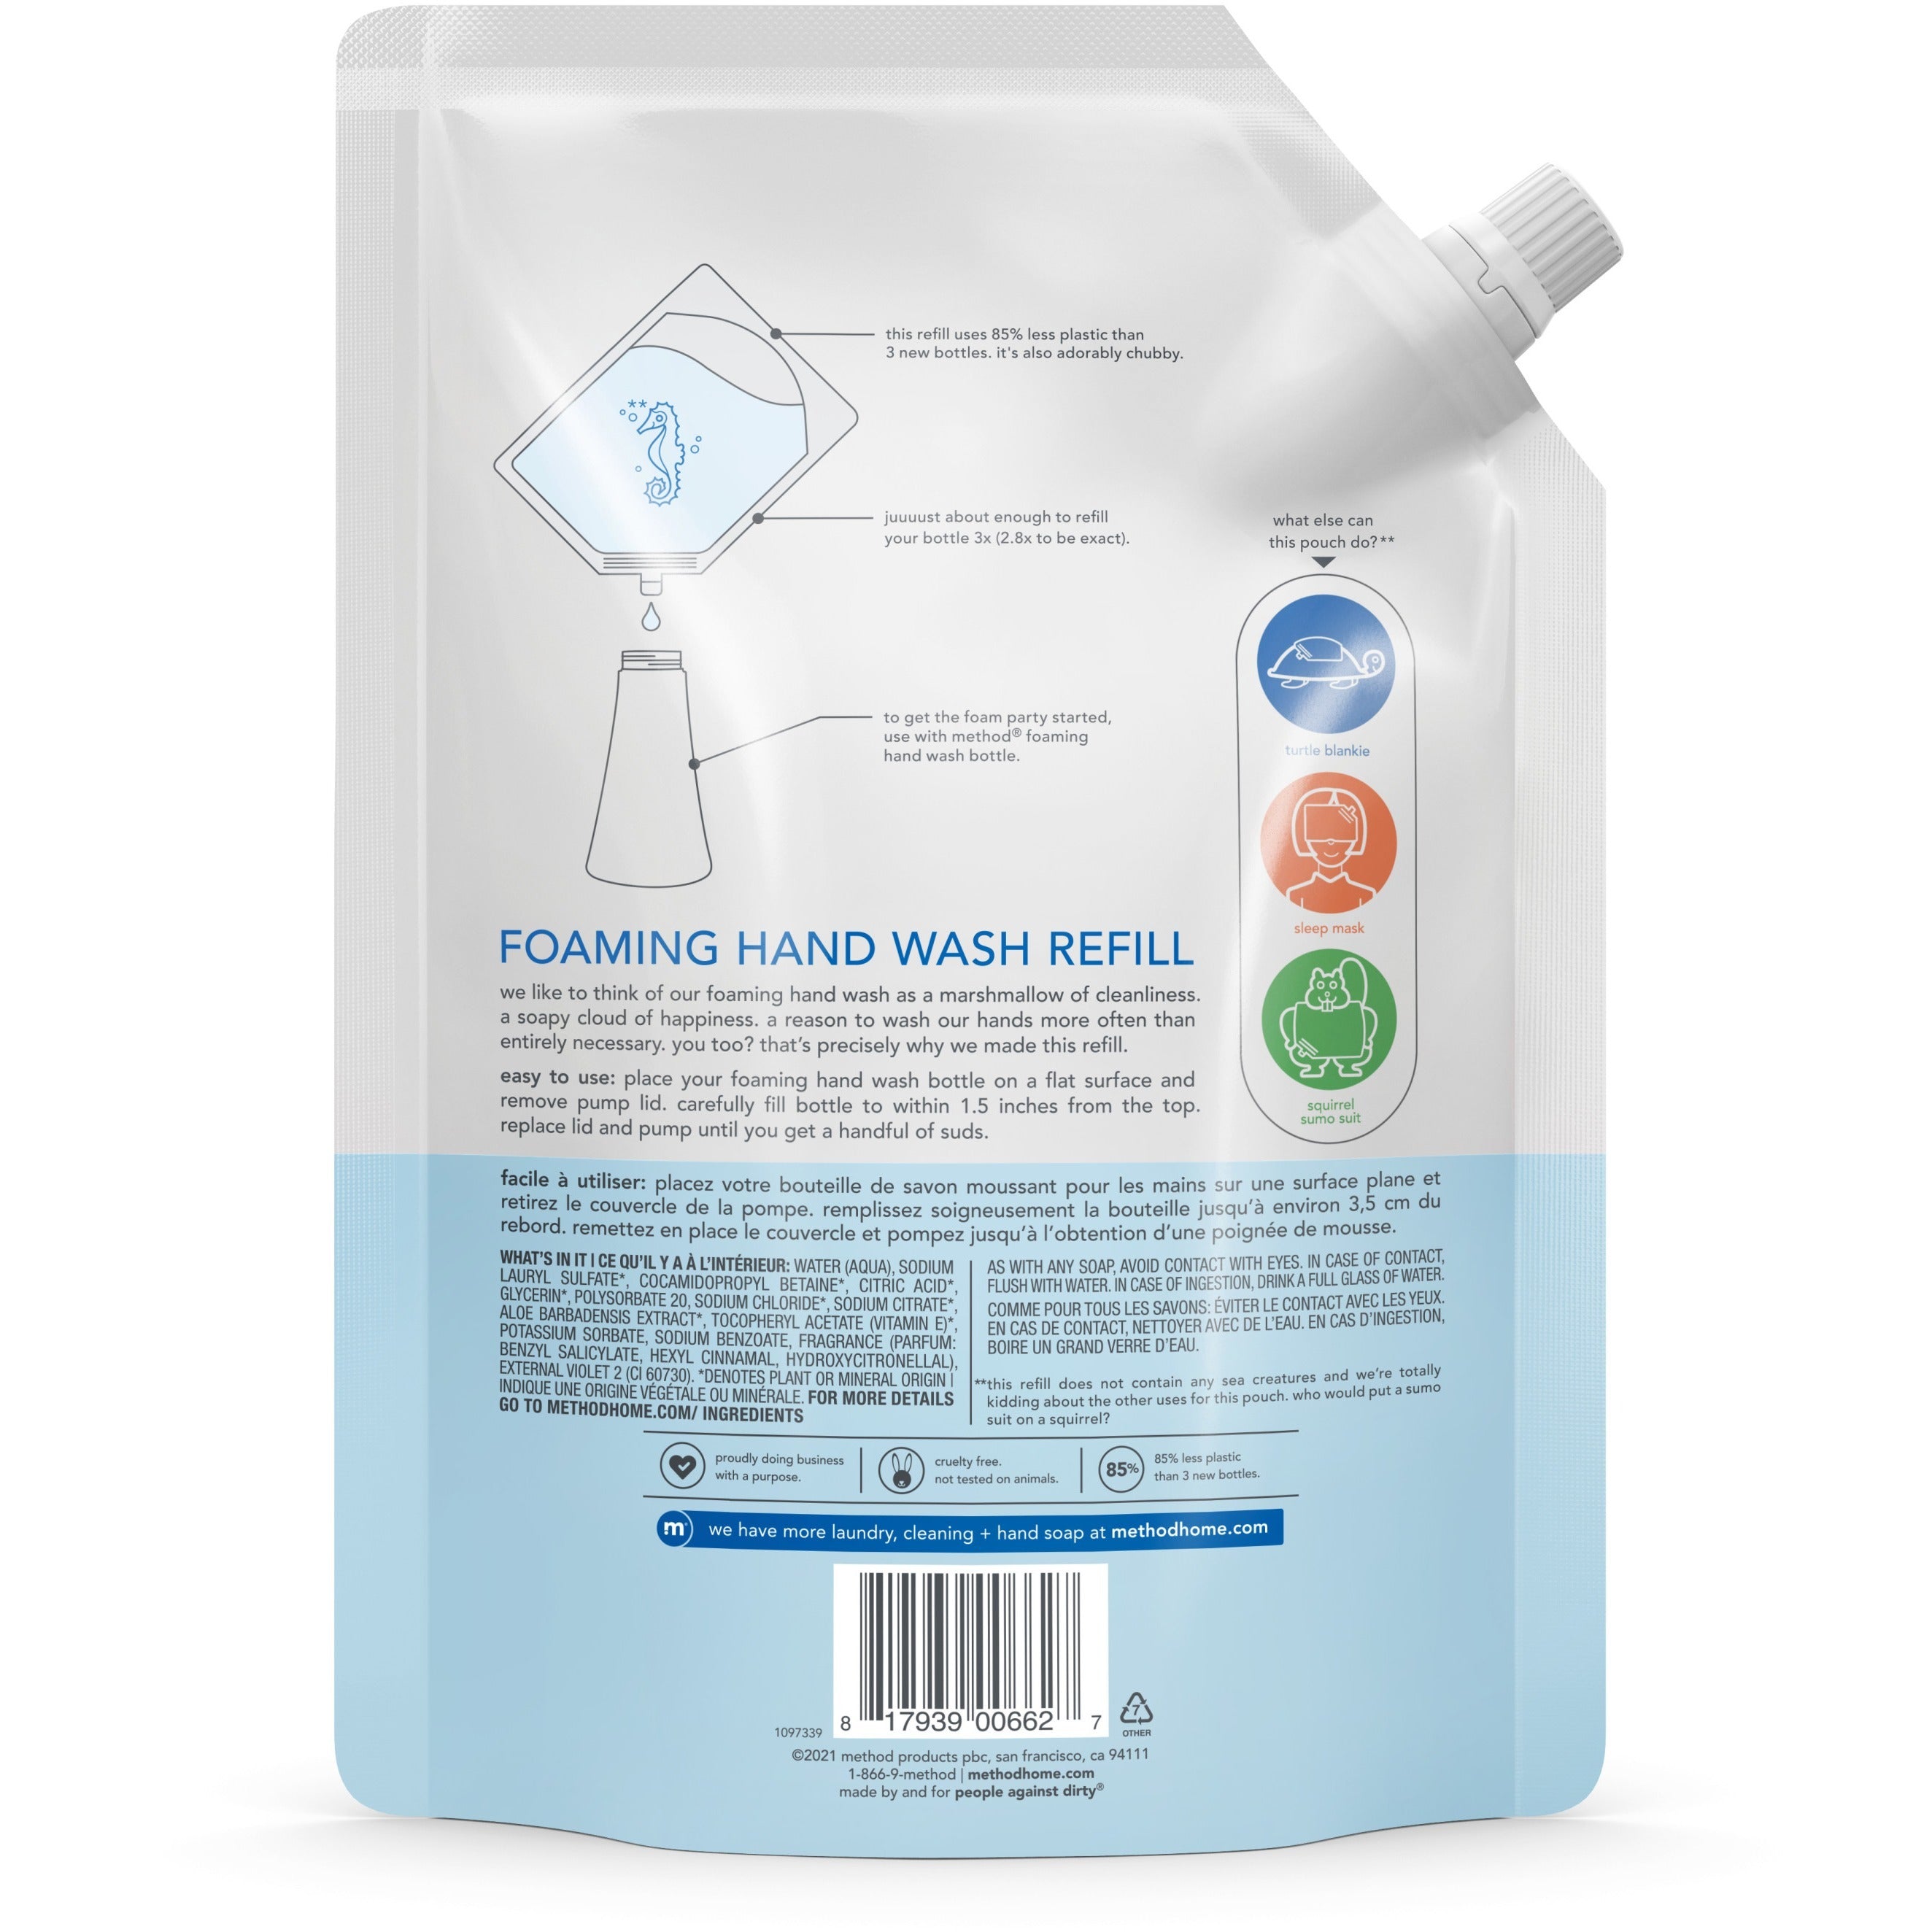 method-foaming-hand-soap-refill-sweet-water-scentfor-28-fl-oz-8281-ml-hand-clear-triclosan-free-4-carton_mth00662ct - 2